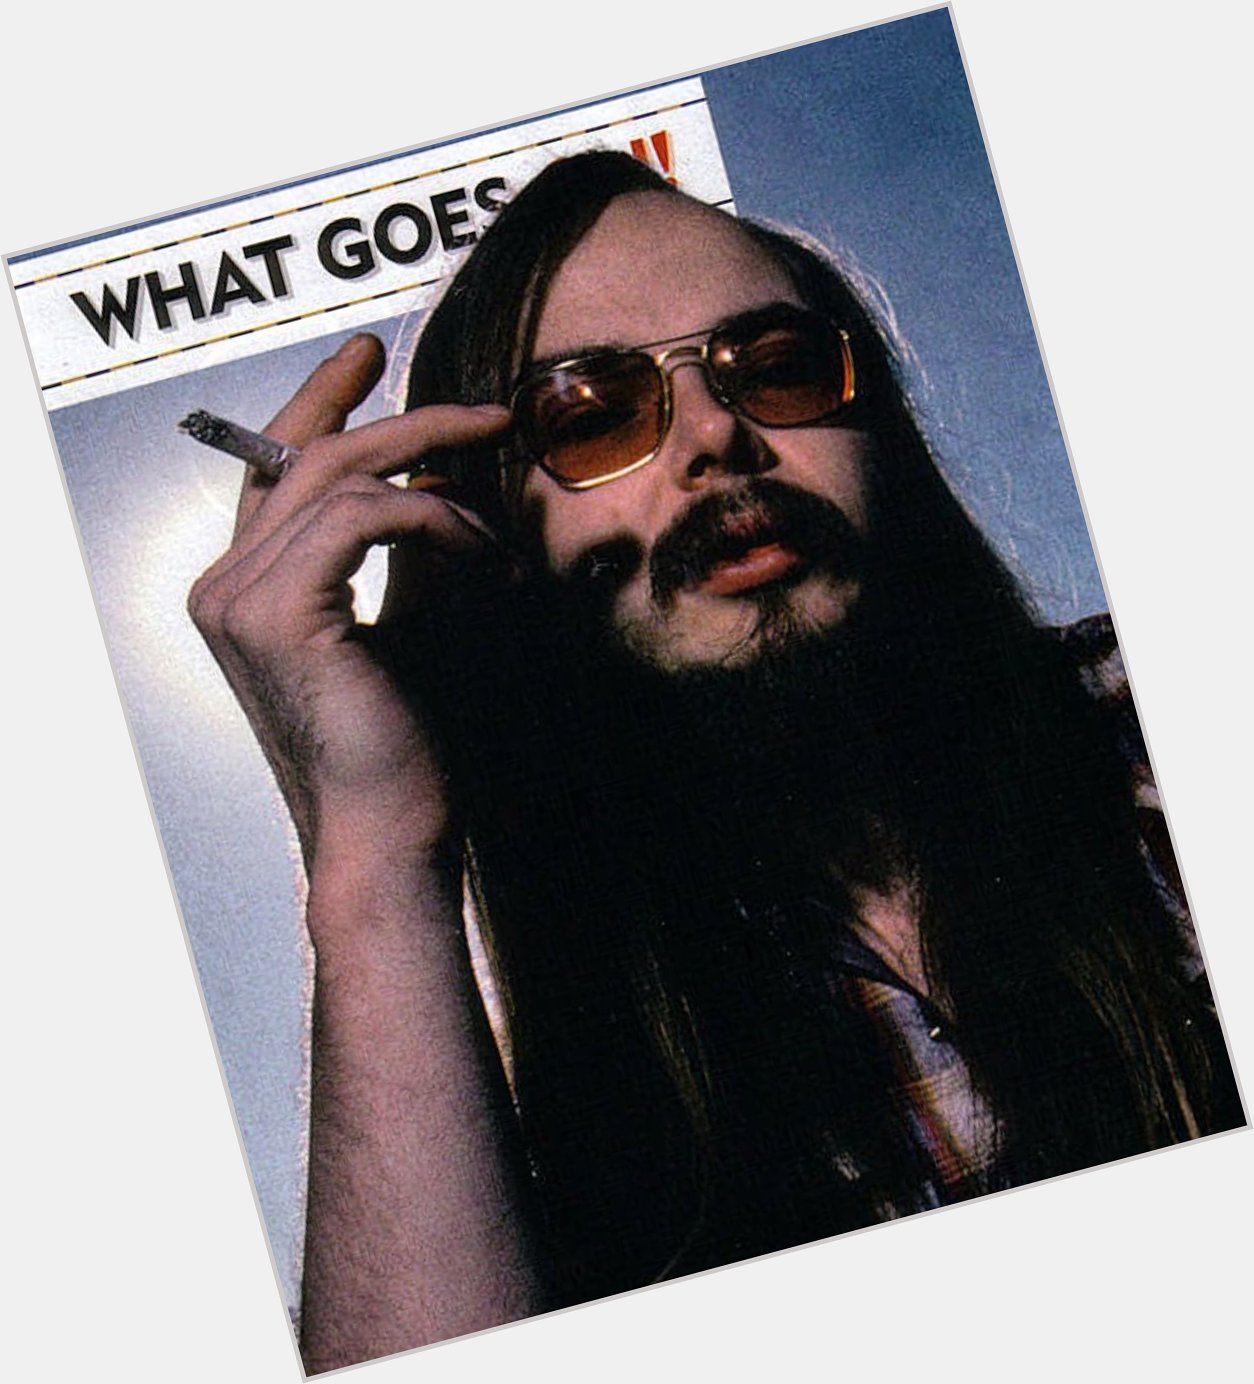 Happy Birthday to the late great guitarist and silent partner of Steely Dan, Walter Becker! RIP 